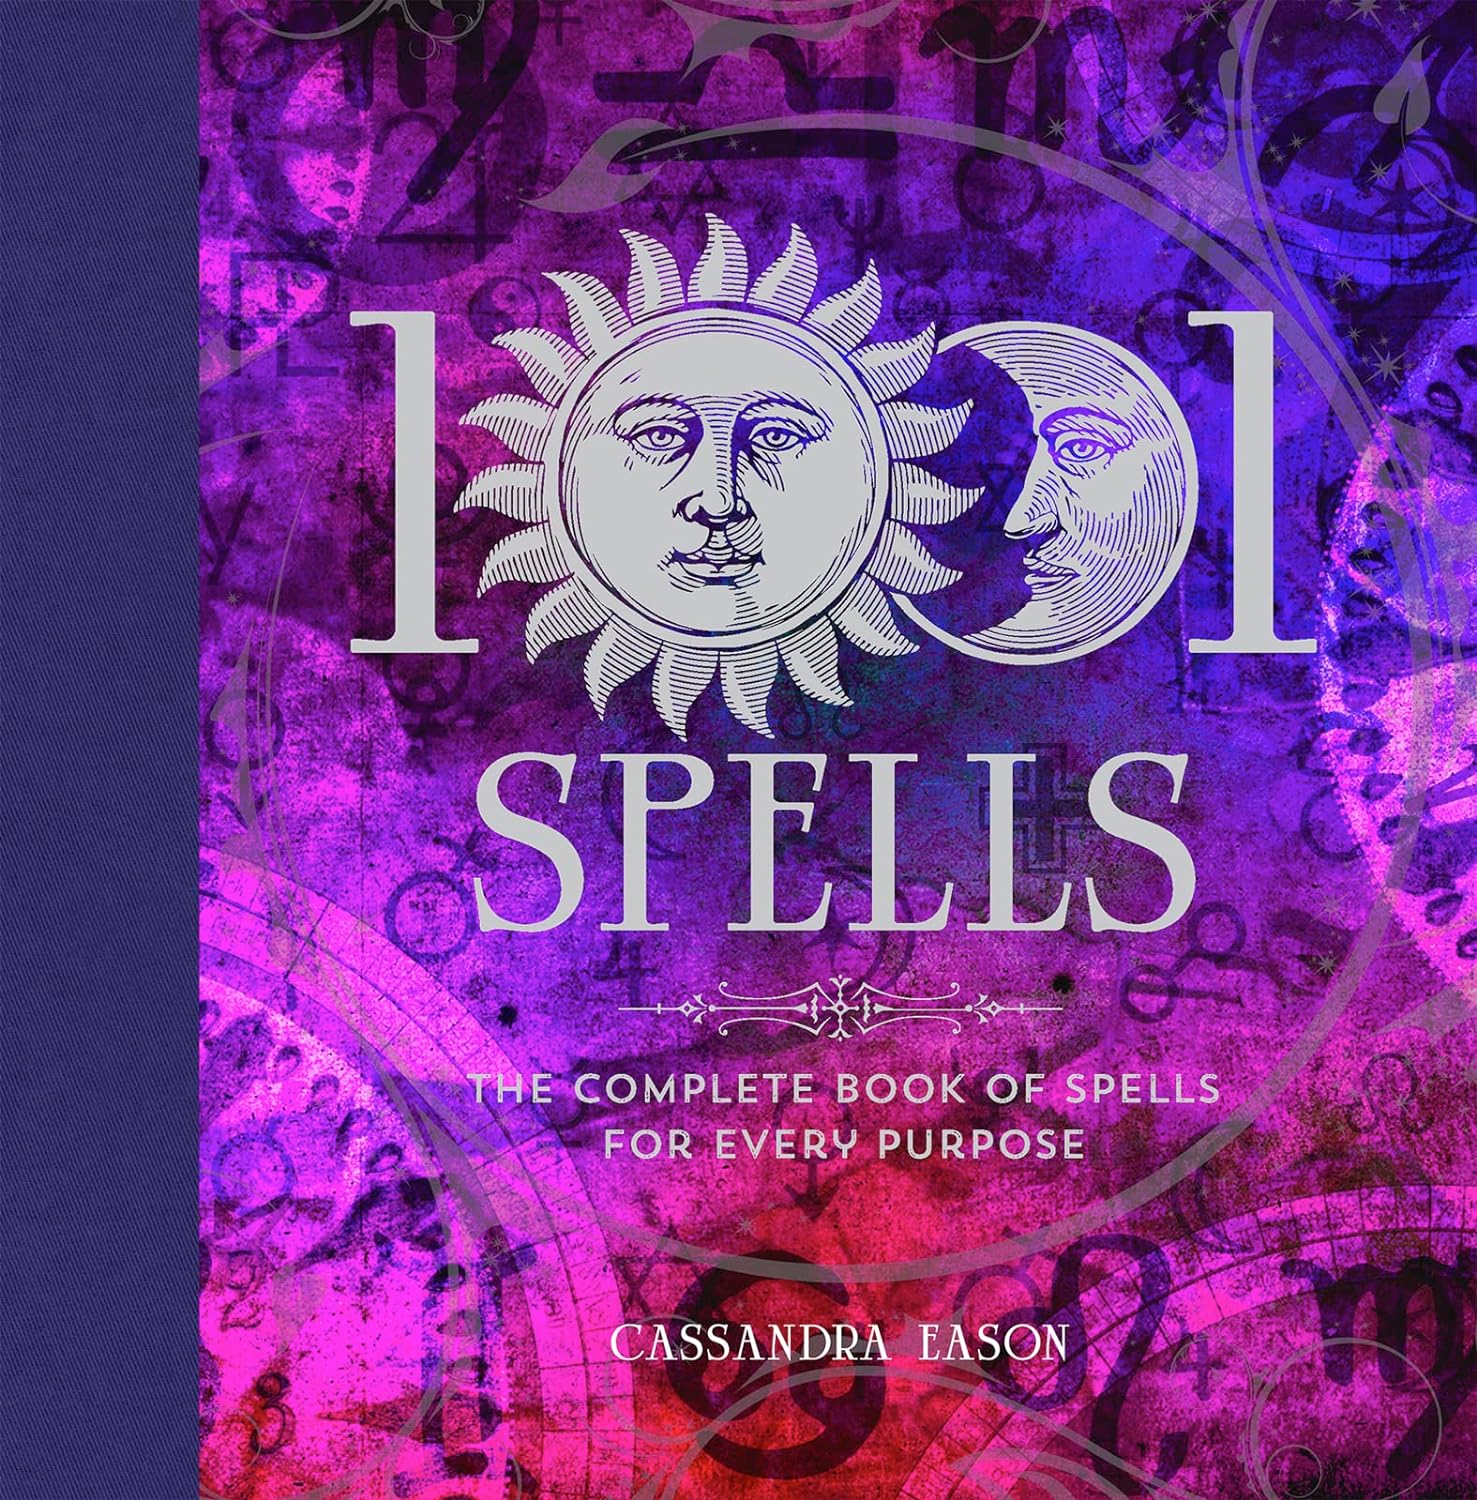 1001 Spells for Every Purpose by Cassandra Eason